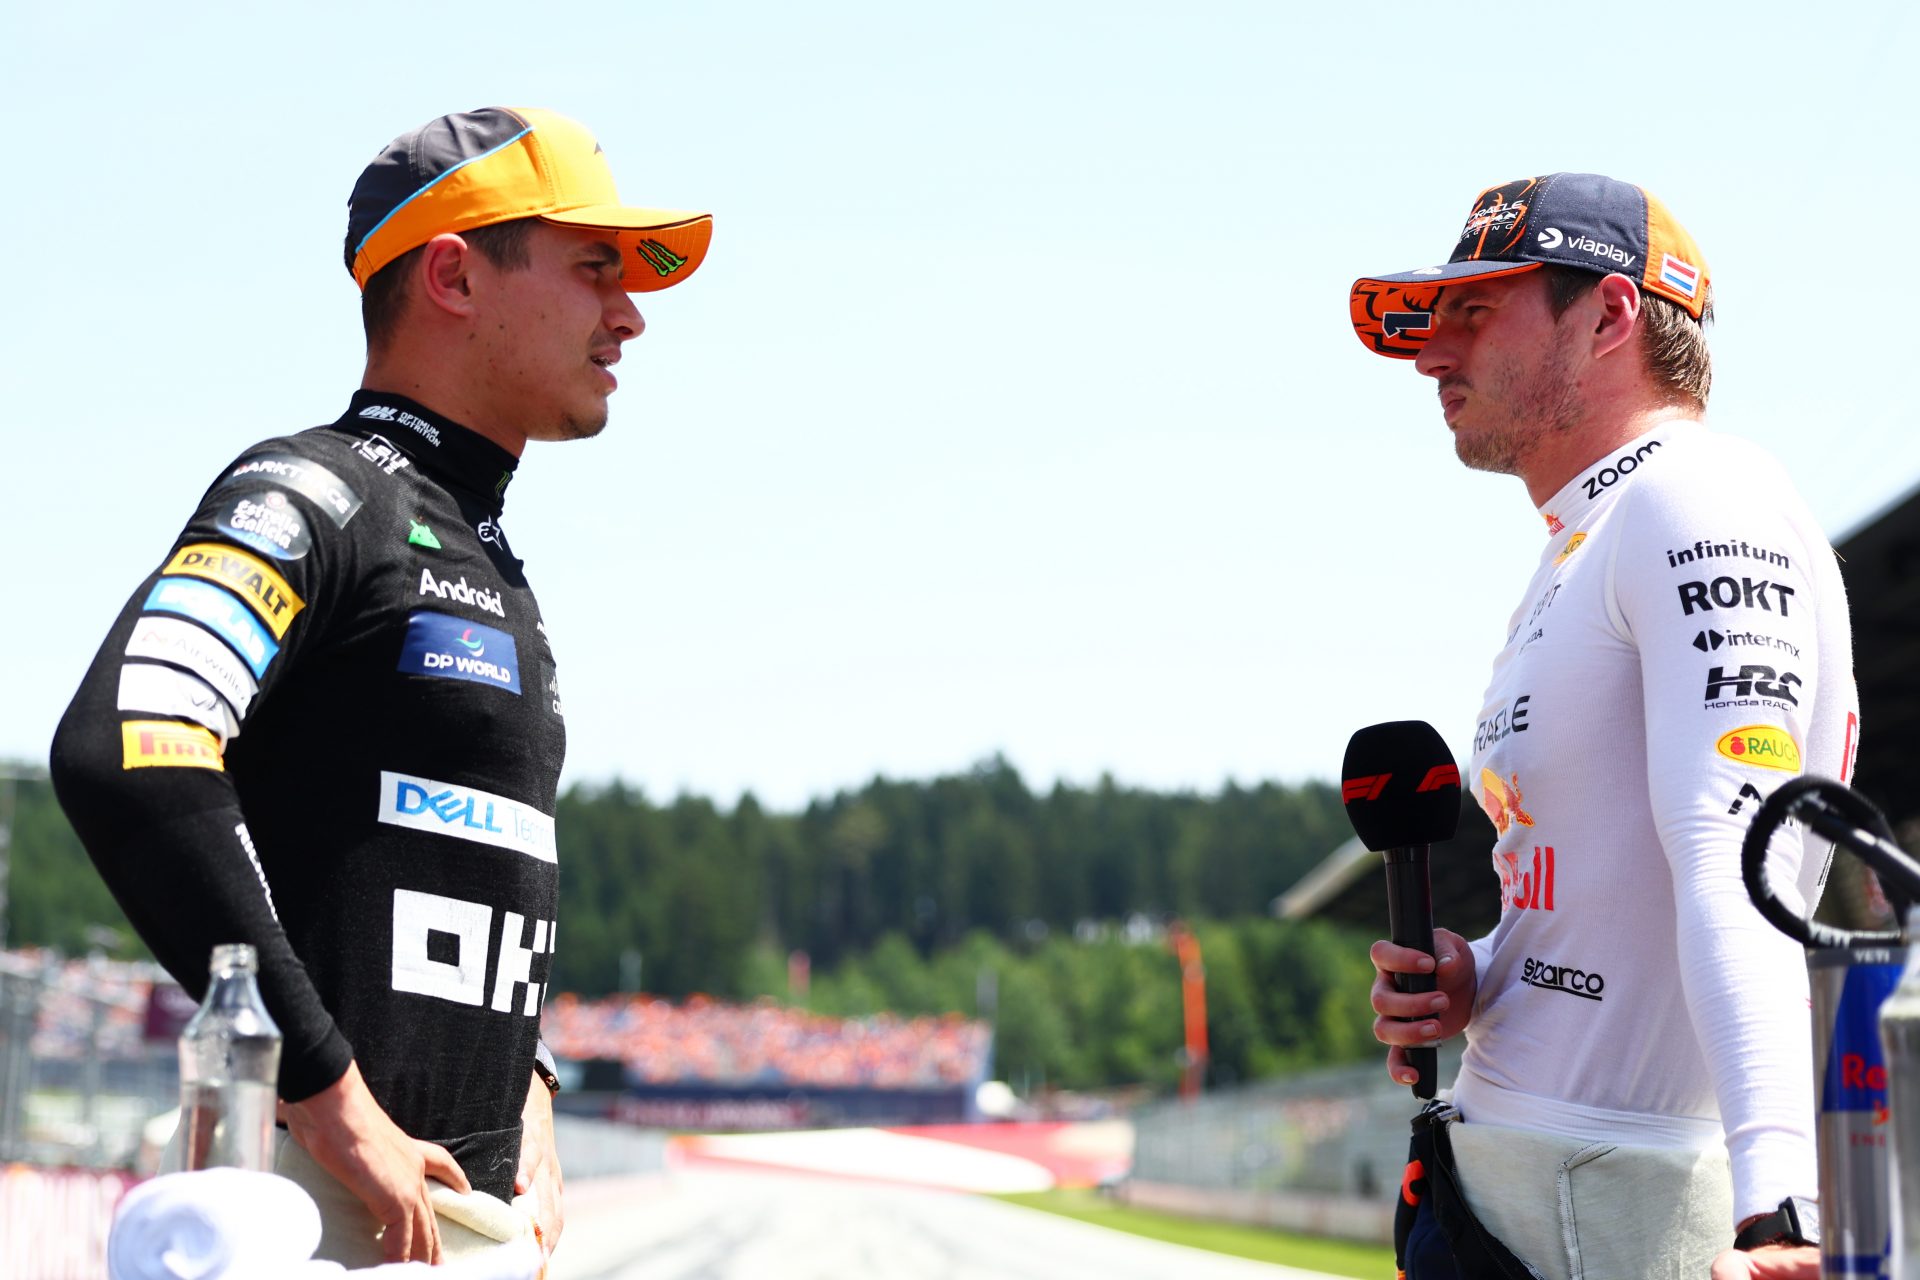 Lando Norris lashes out at Verstappen after crash at the Austrian GP